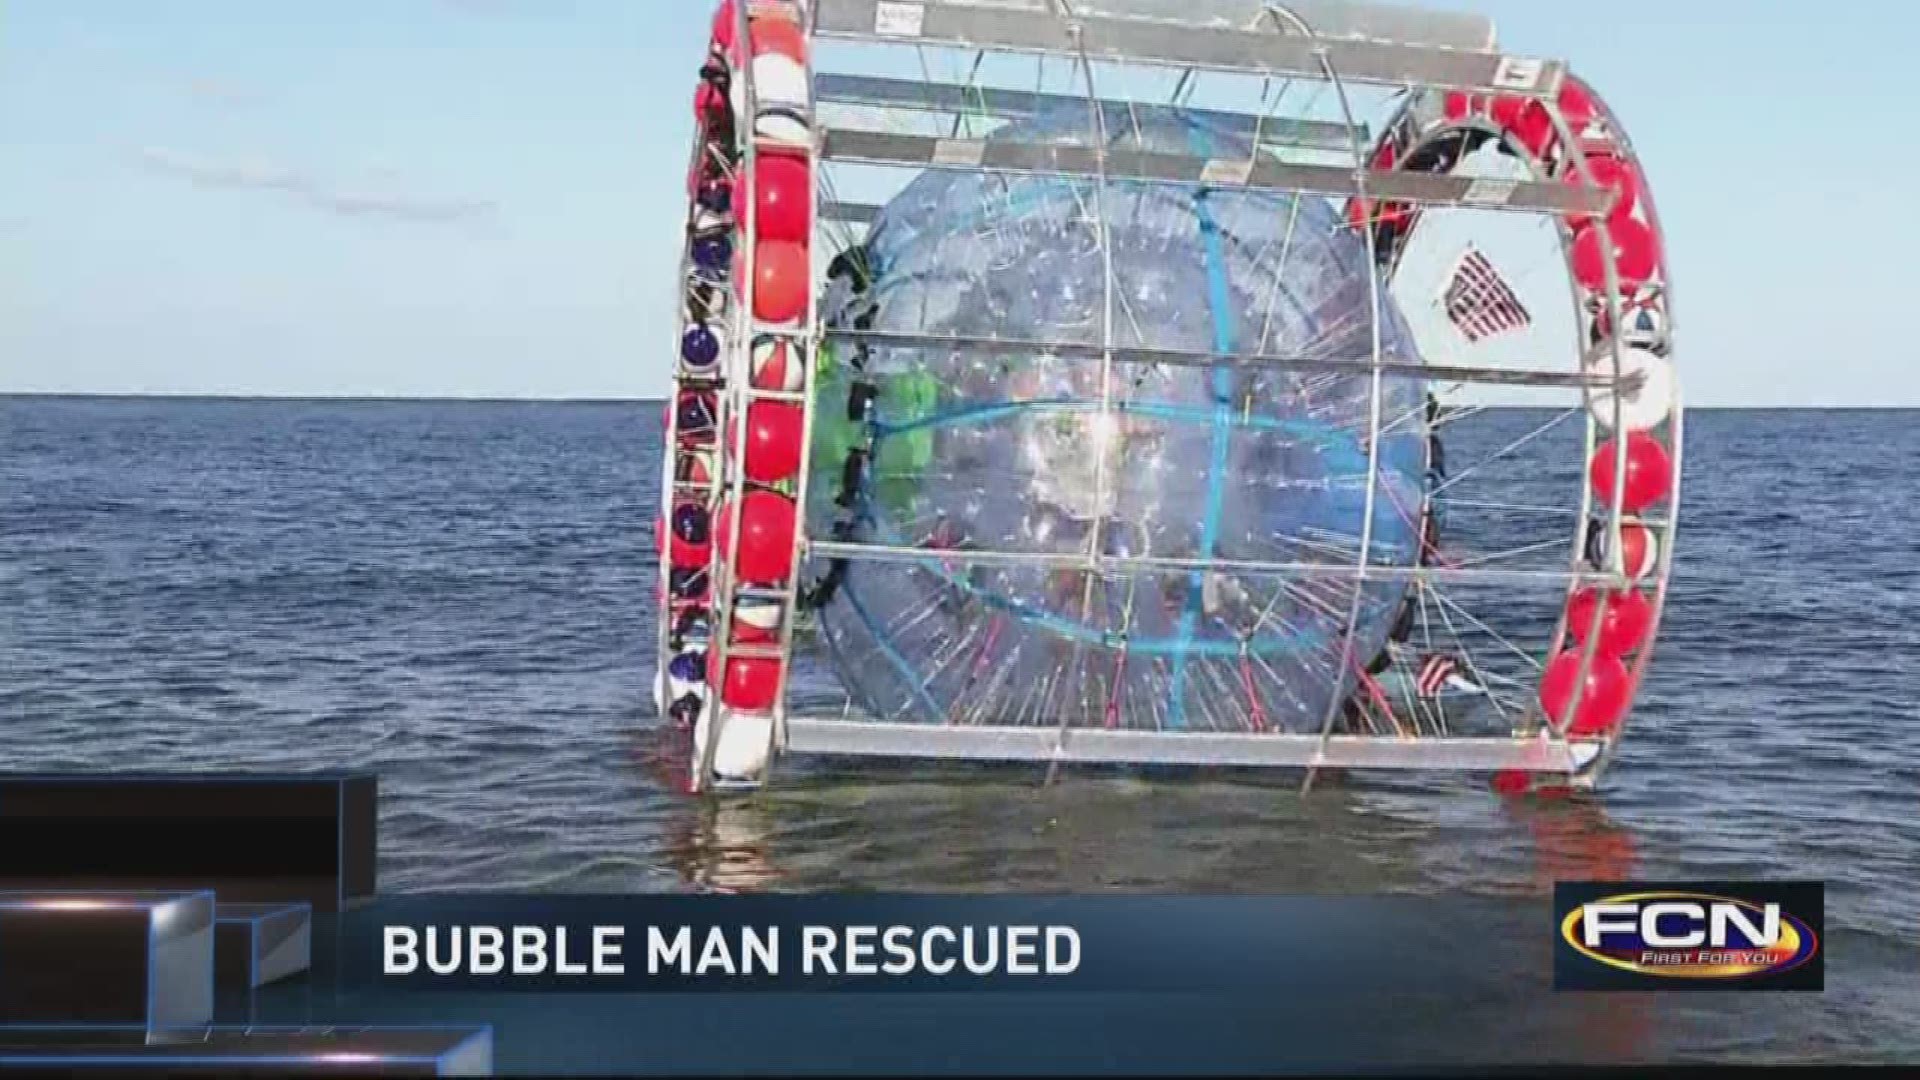 Bubble man was stopped by the Coast Guard, yet again.